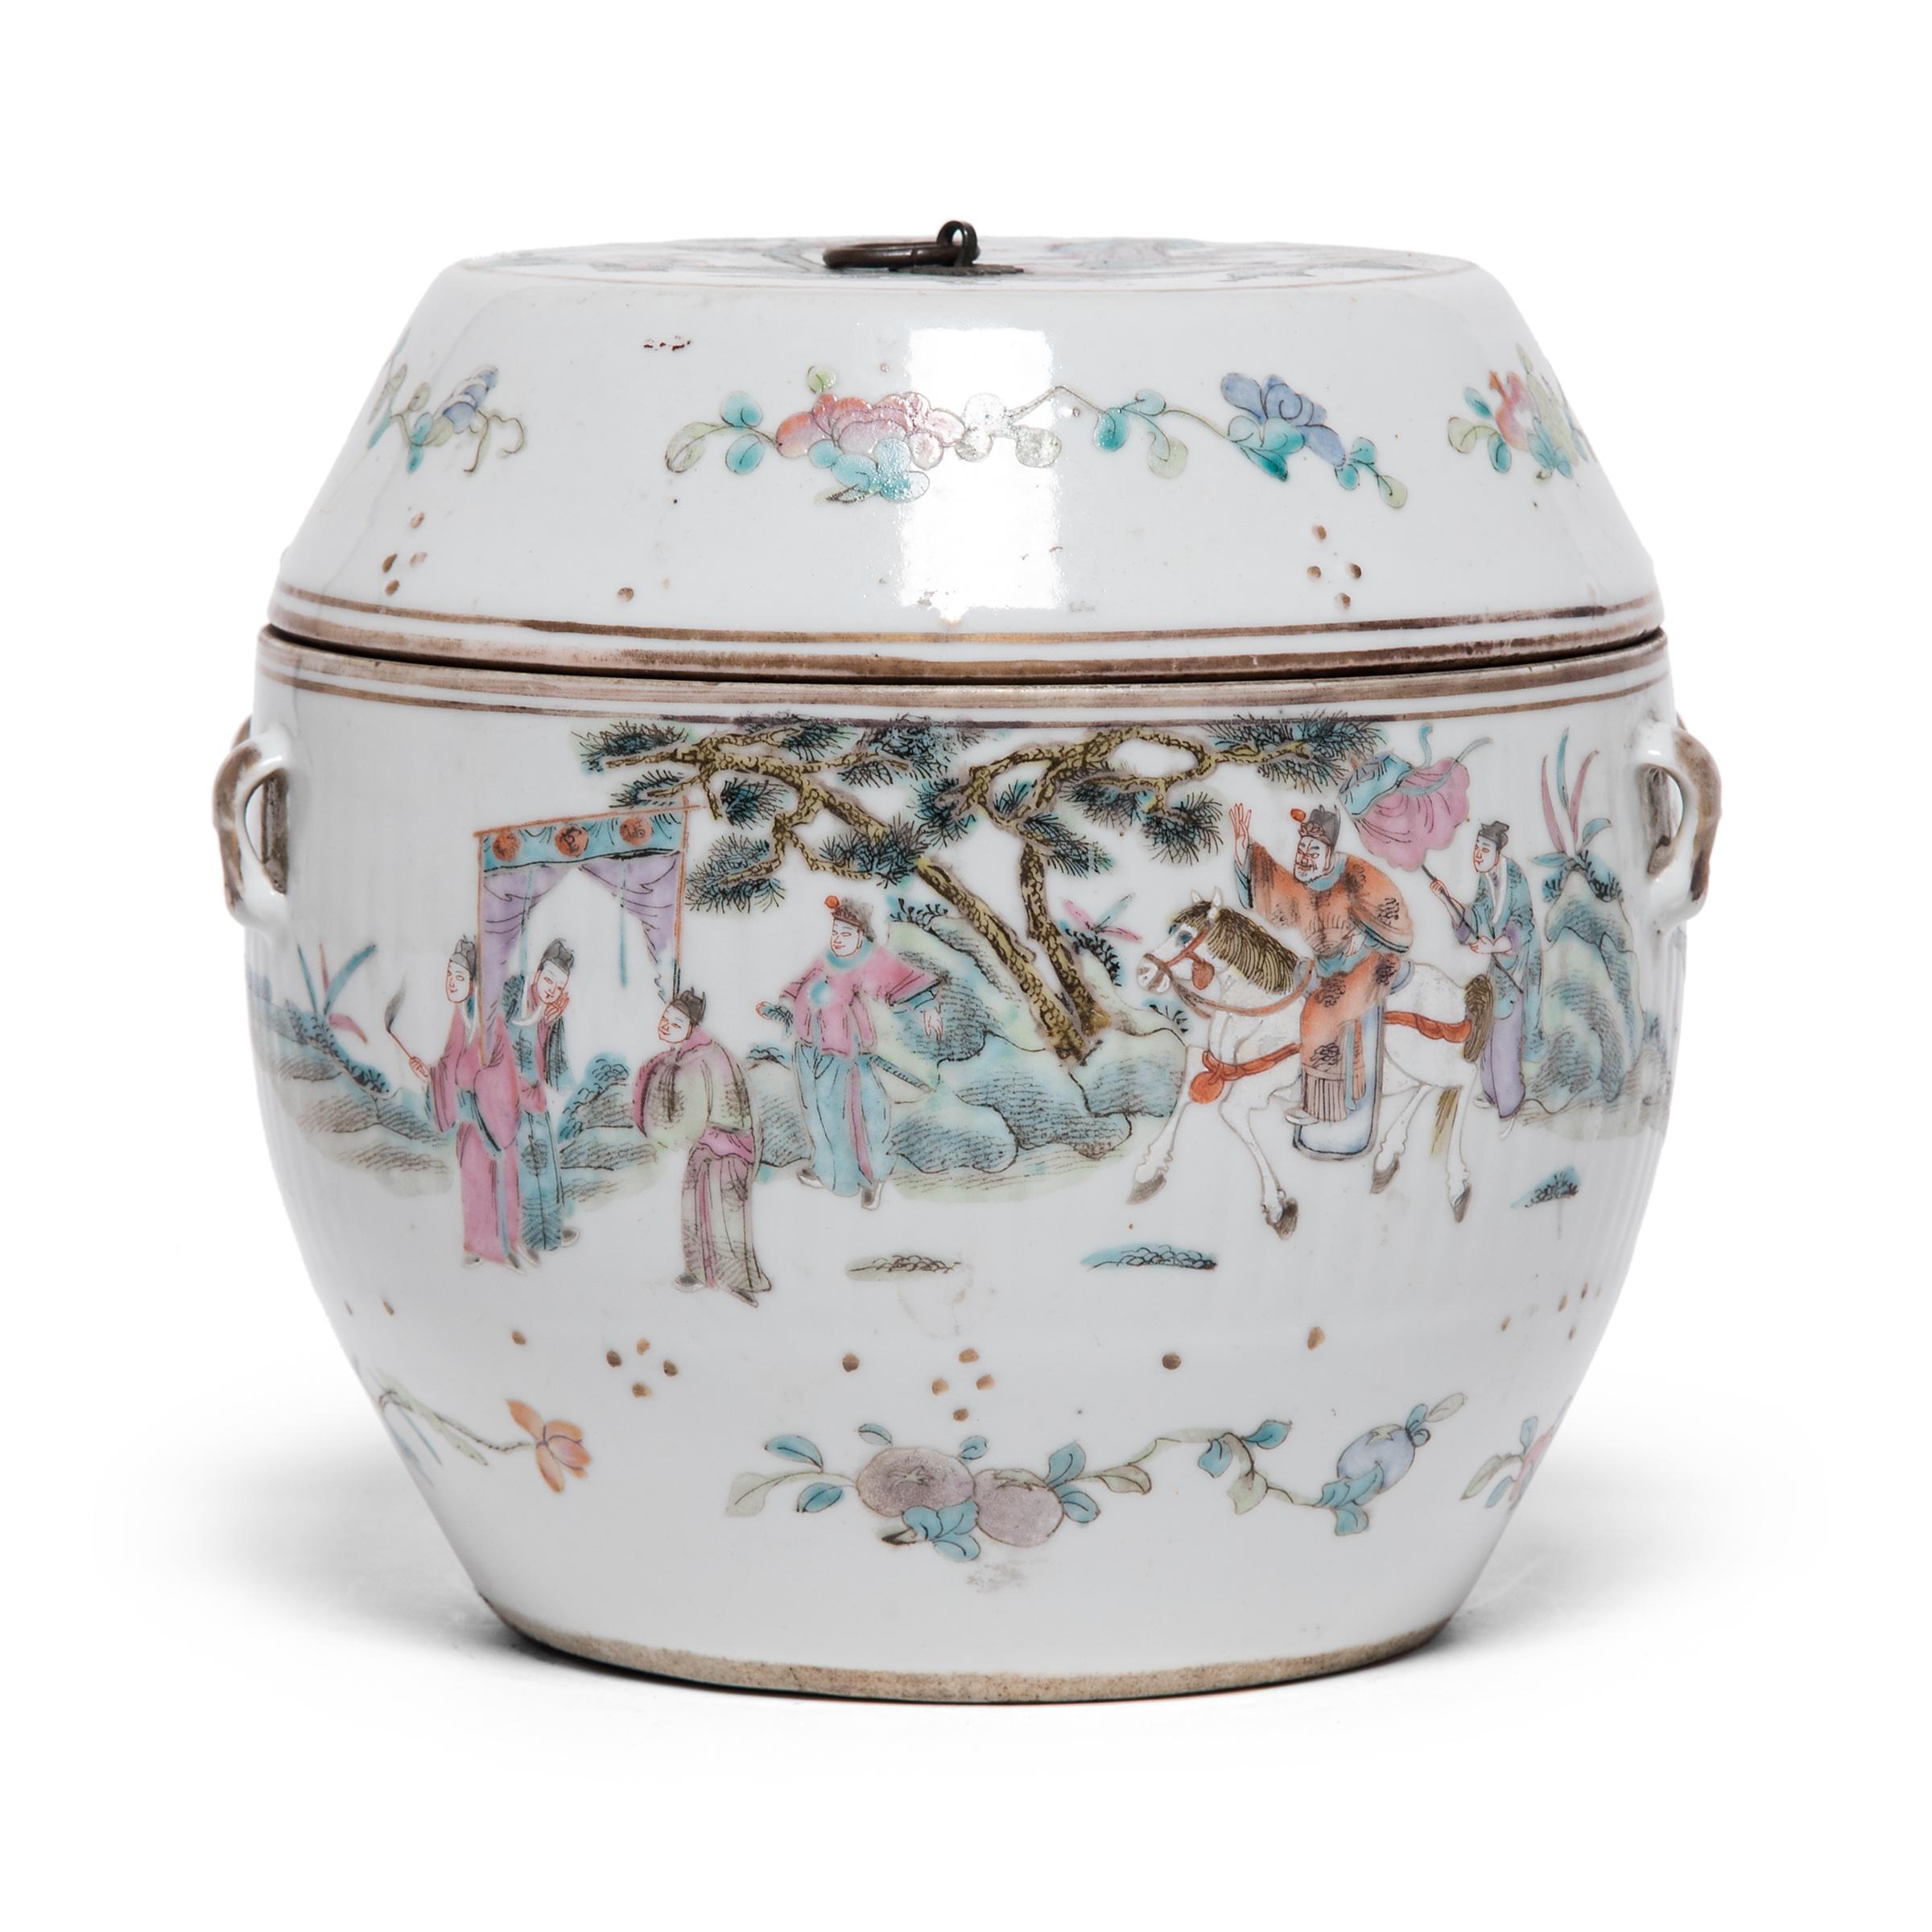 Chinese Export Chinese Famille Rose Soup Tureen with Courtly Gathering, c. 1870